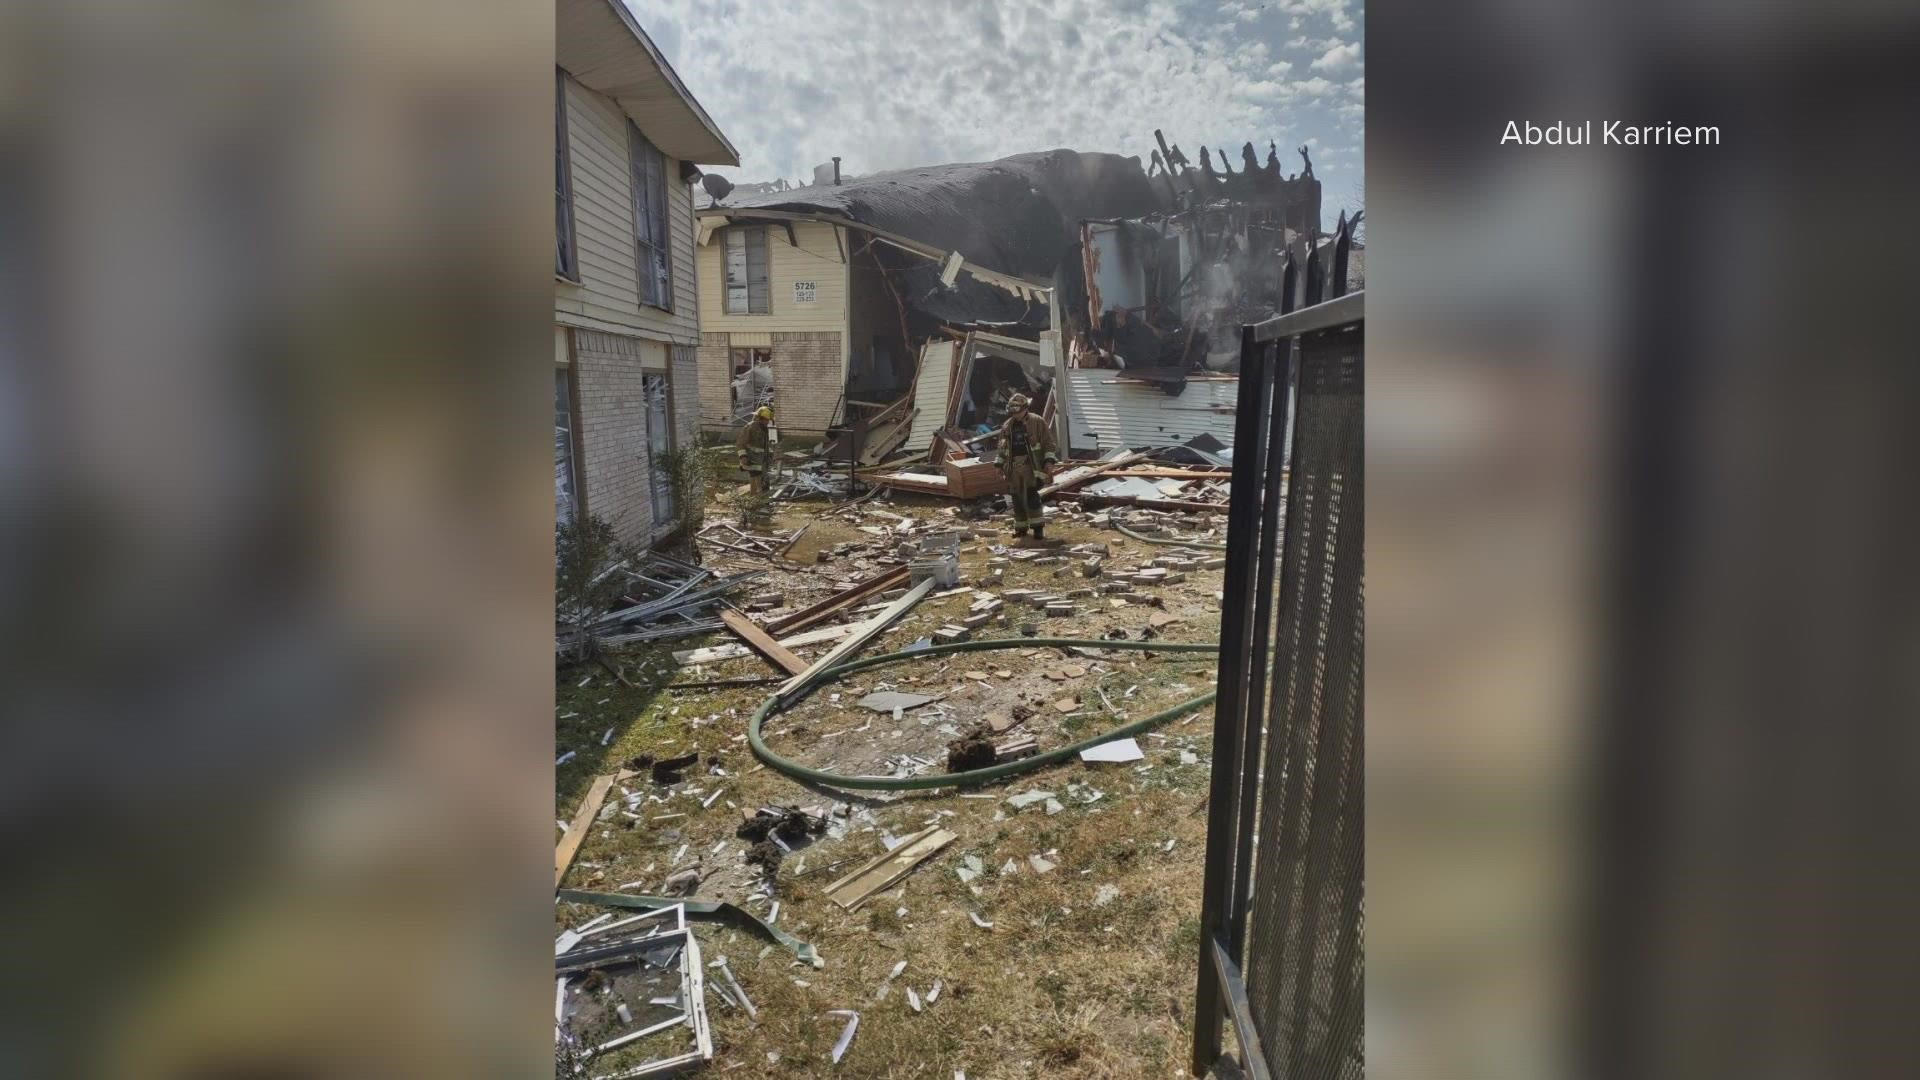 Neighbors told WFAA they didn't get a chance to grab anything before the explosion; officials said all of the people injured are expected to survive.